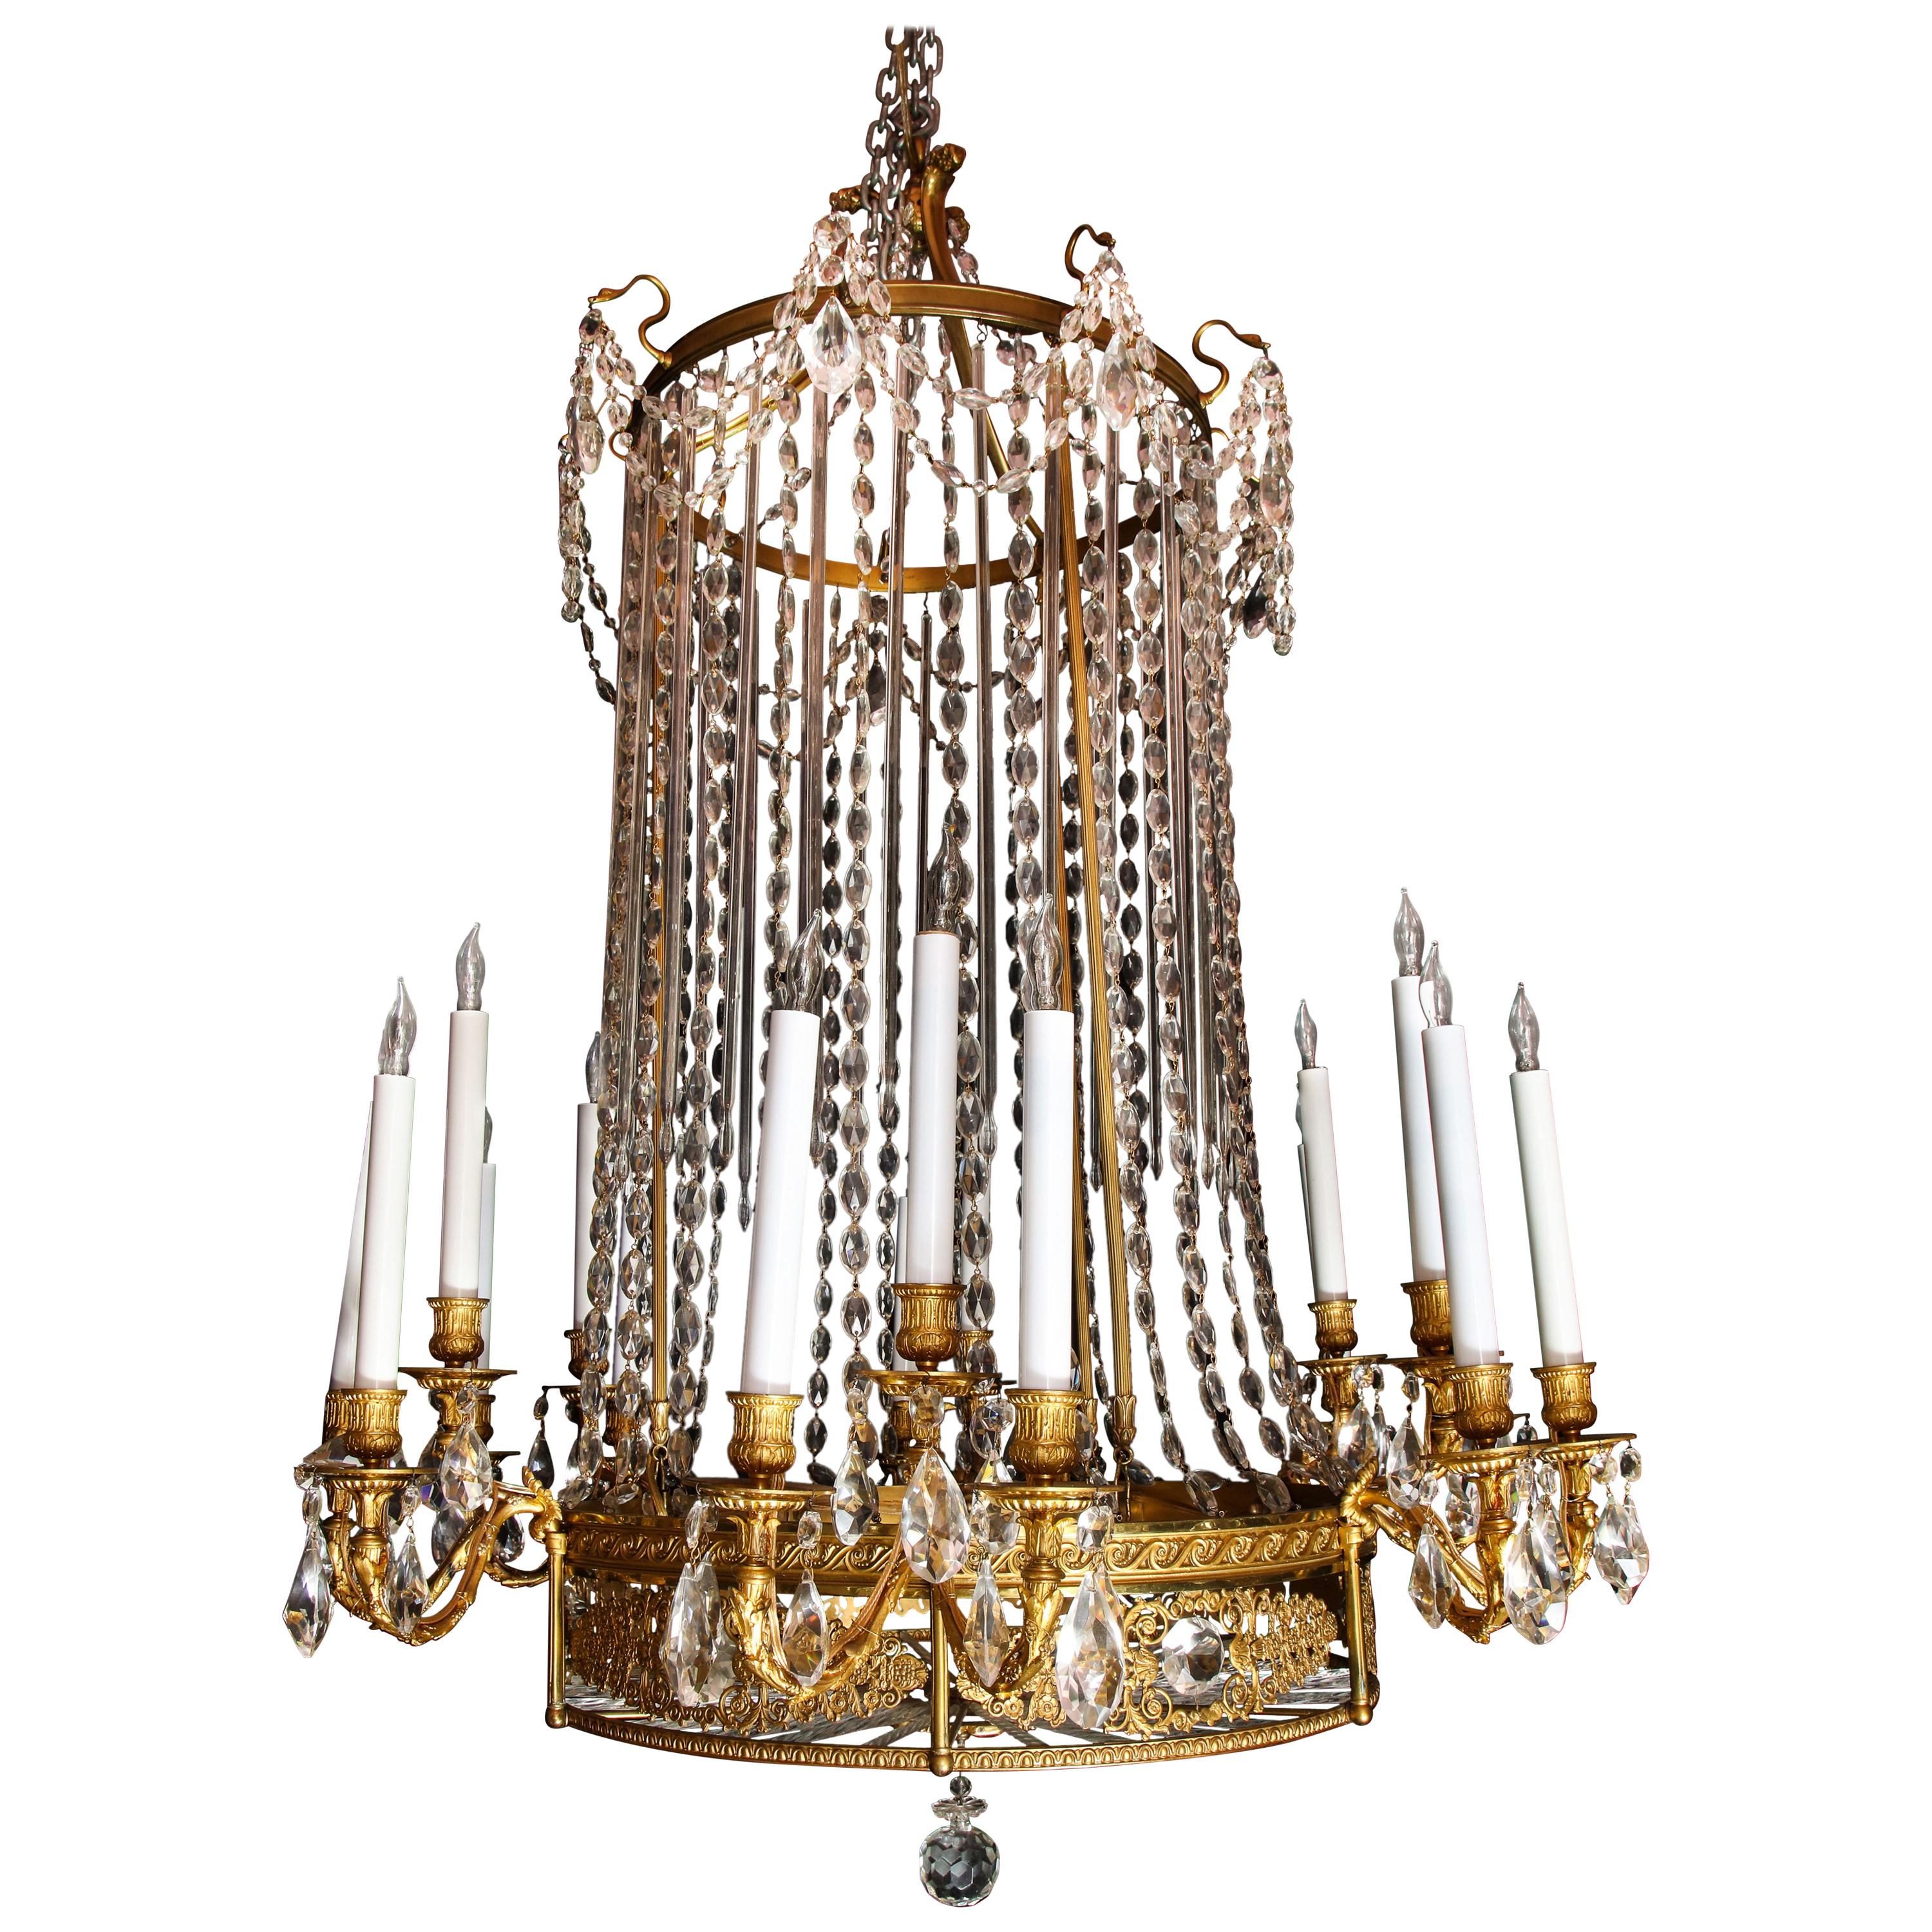 Fine Antique French Louis XVI Style Gilt Bronze and Cut Crystal Chandelier